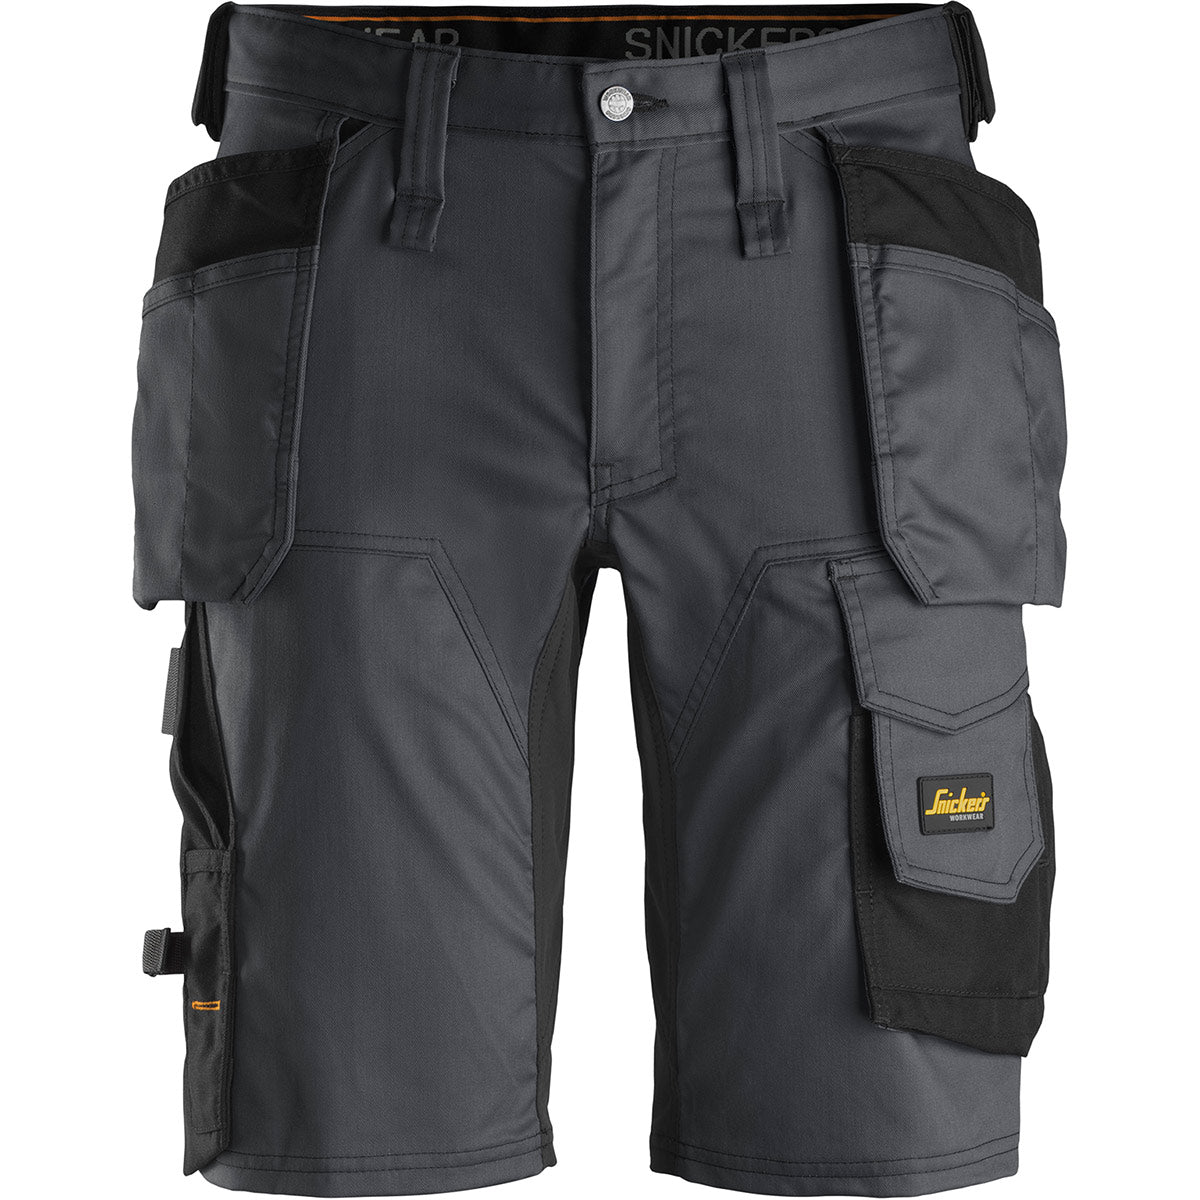 Snickers AllroundWork 6141 Stretch Shorts with Holster Pockets